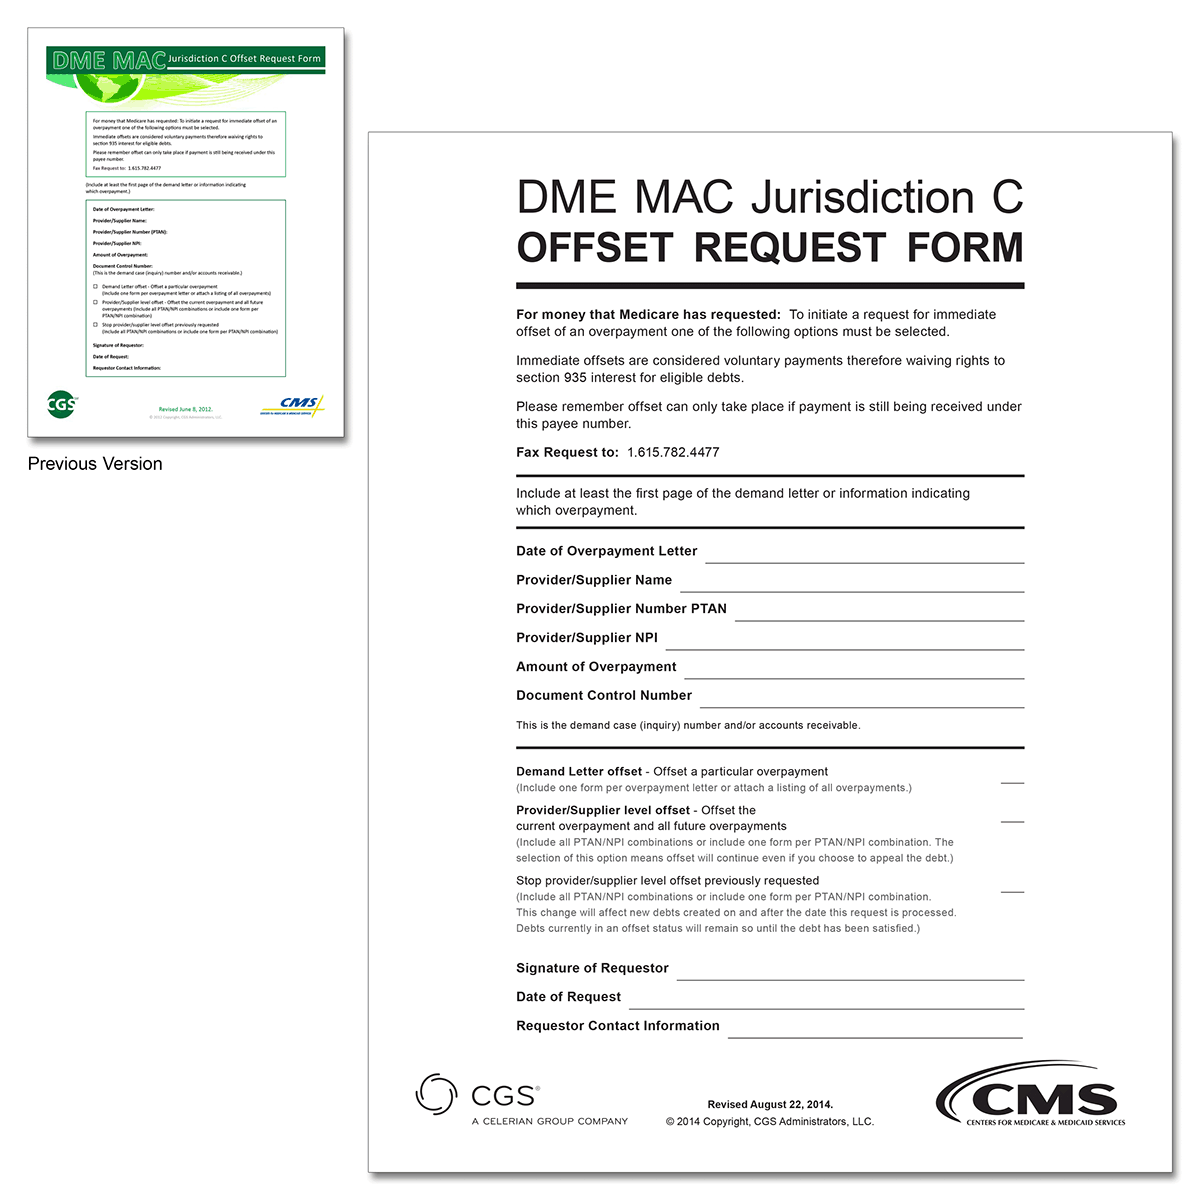 e-publications Forms scanning